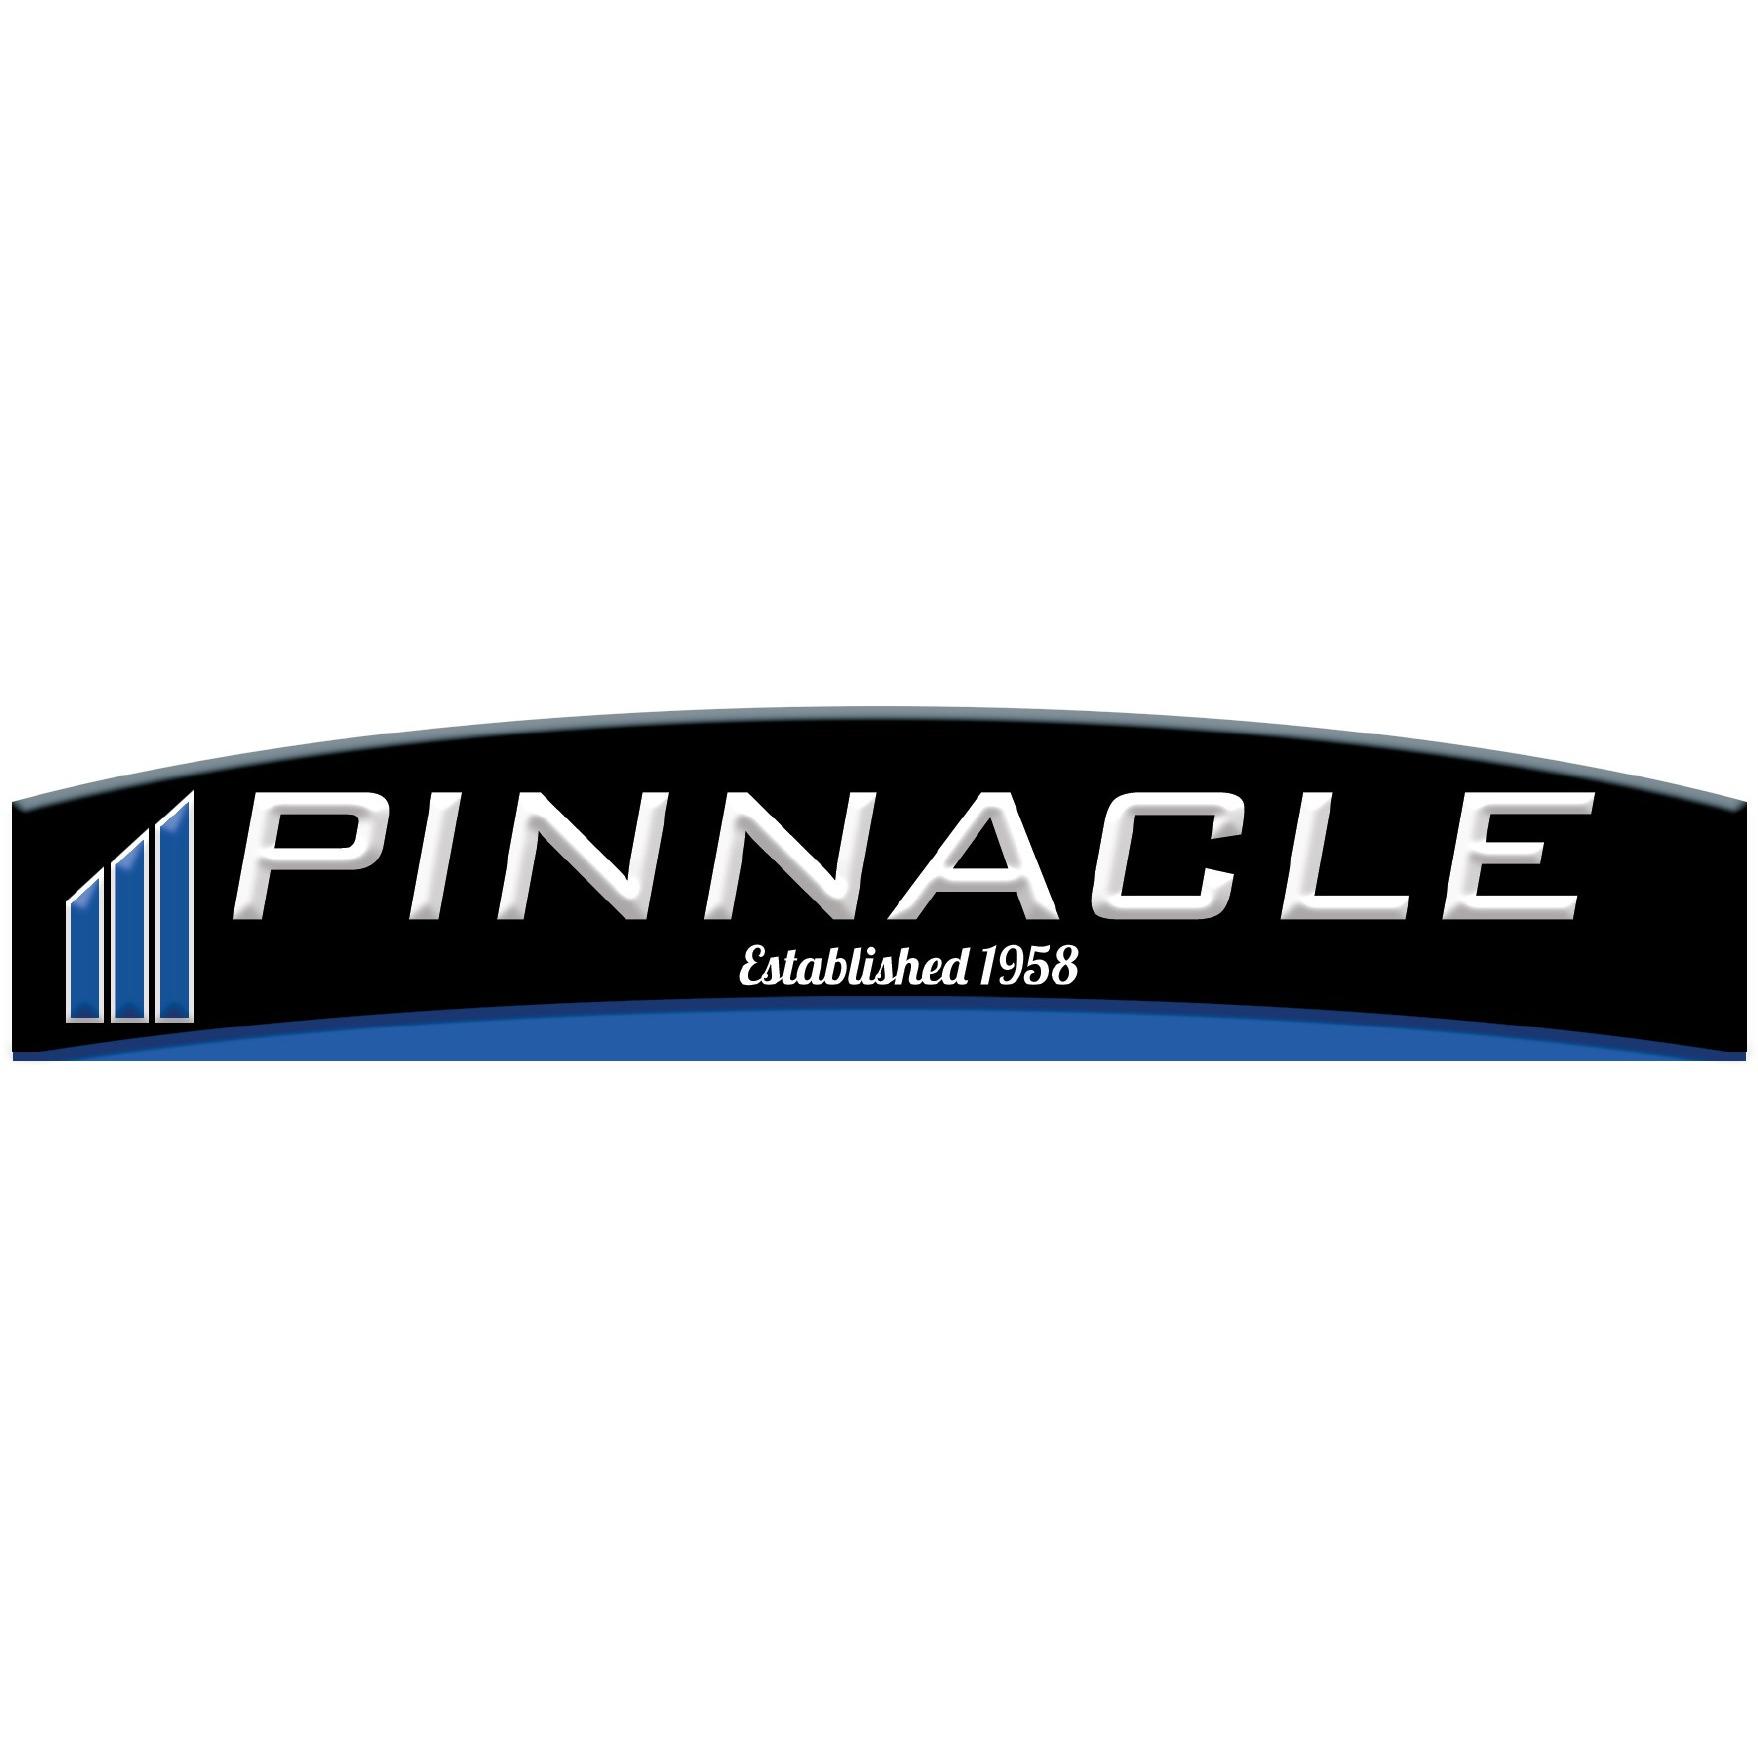 Pinnacle Hood and Fire Protection